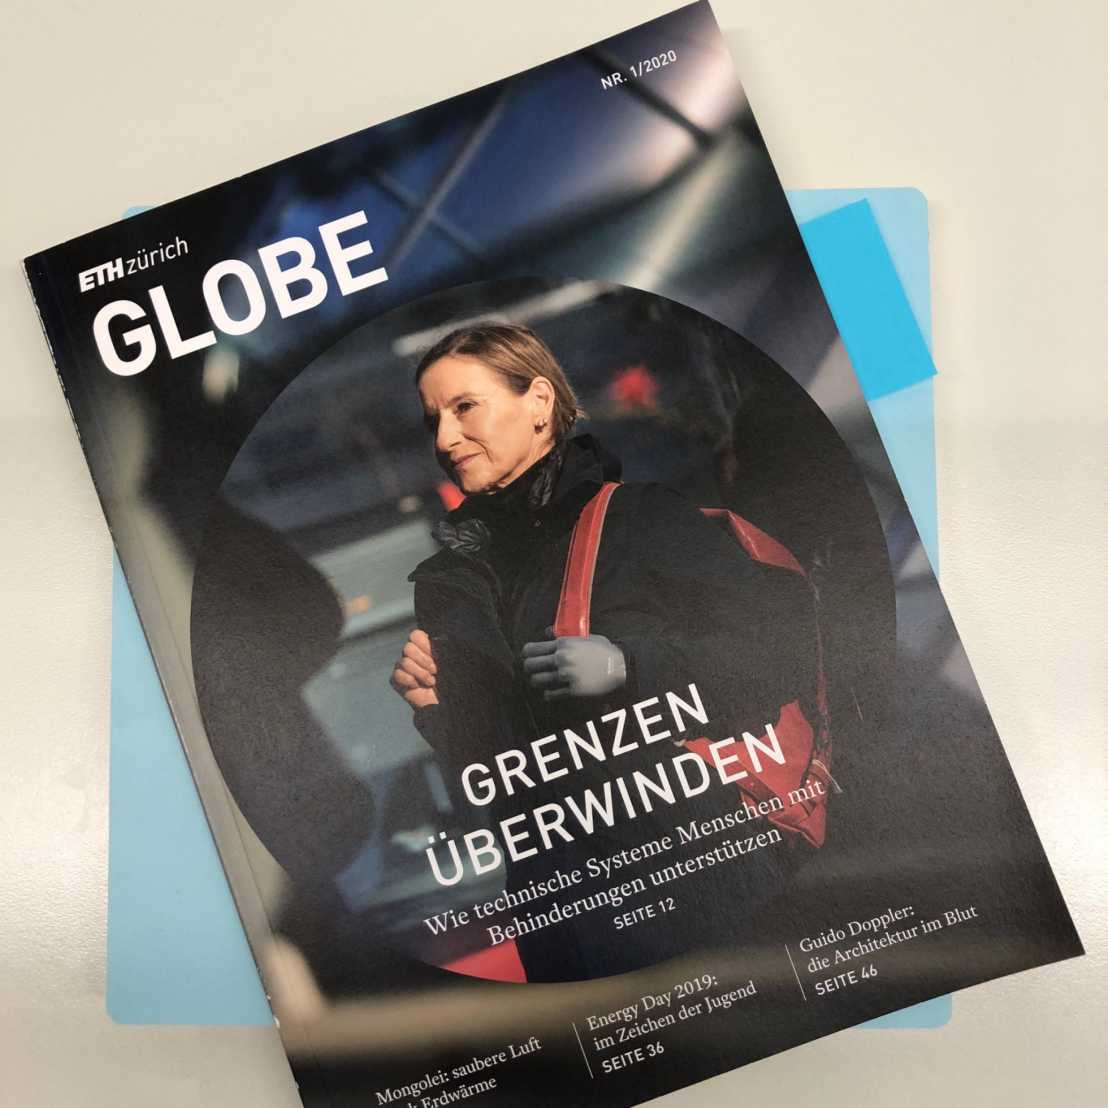 ETH Globe magazine No. 1/2020 with an article about the “barrier-free” programme from p. 24 and online